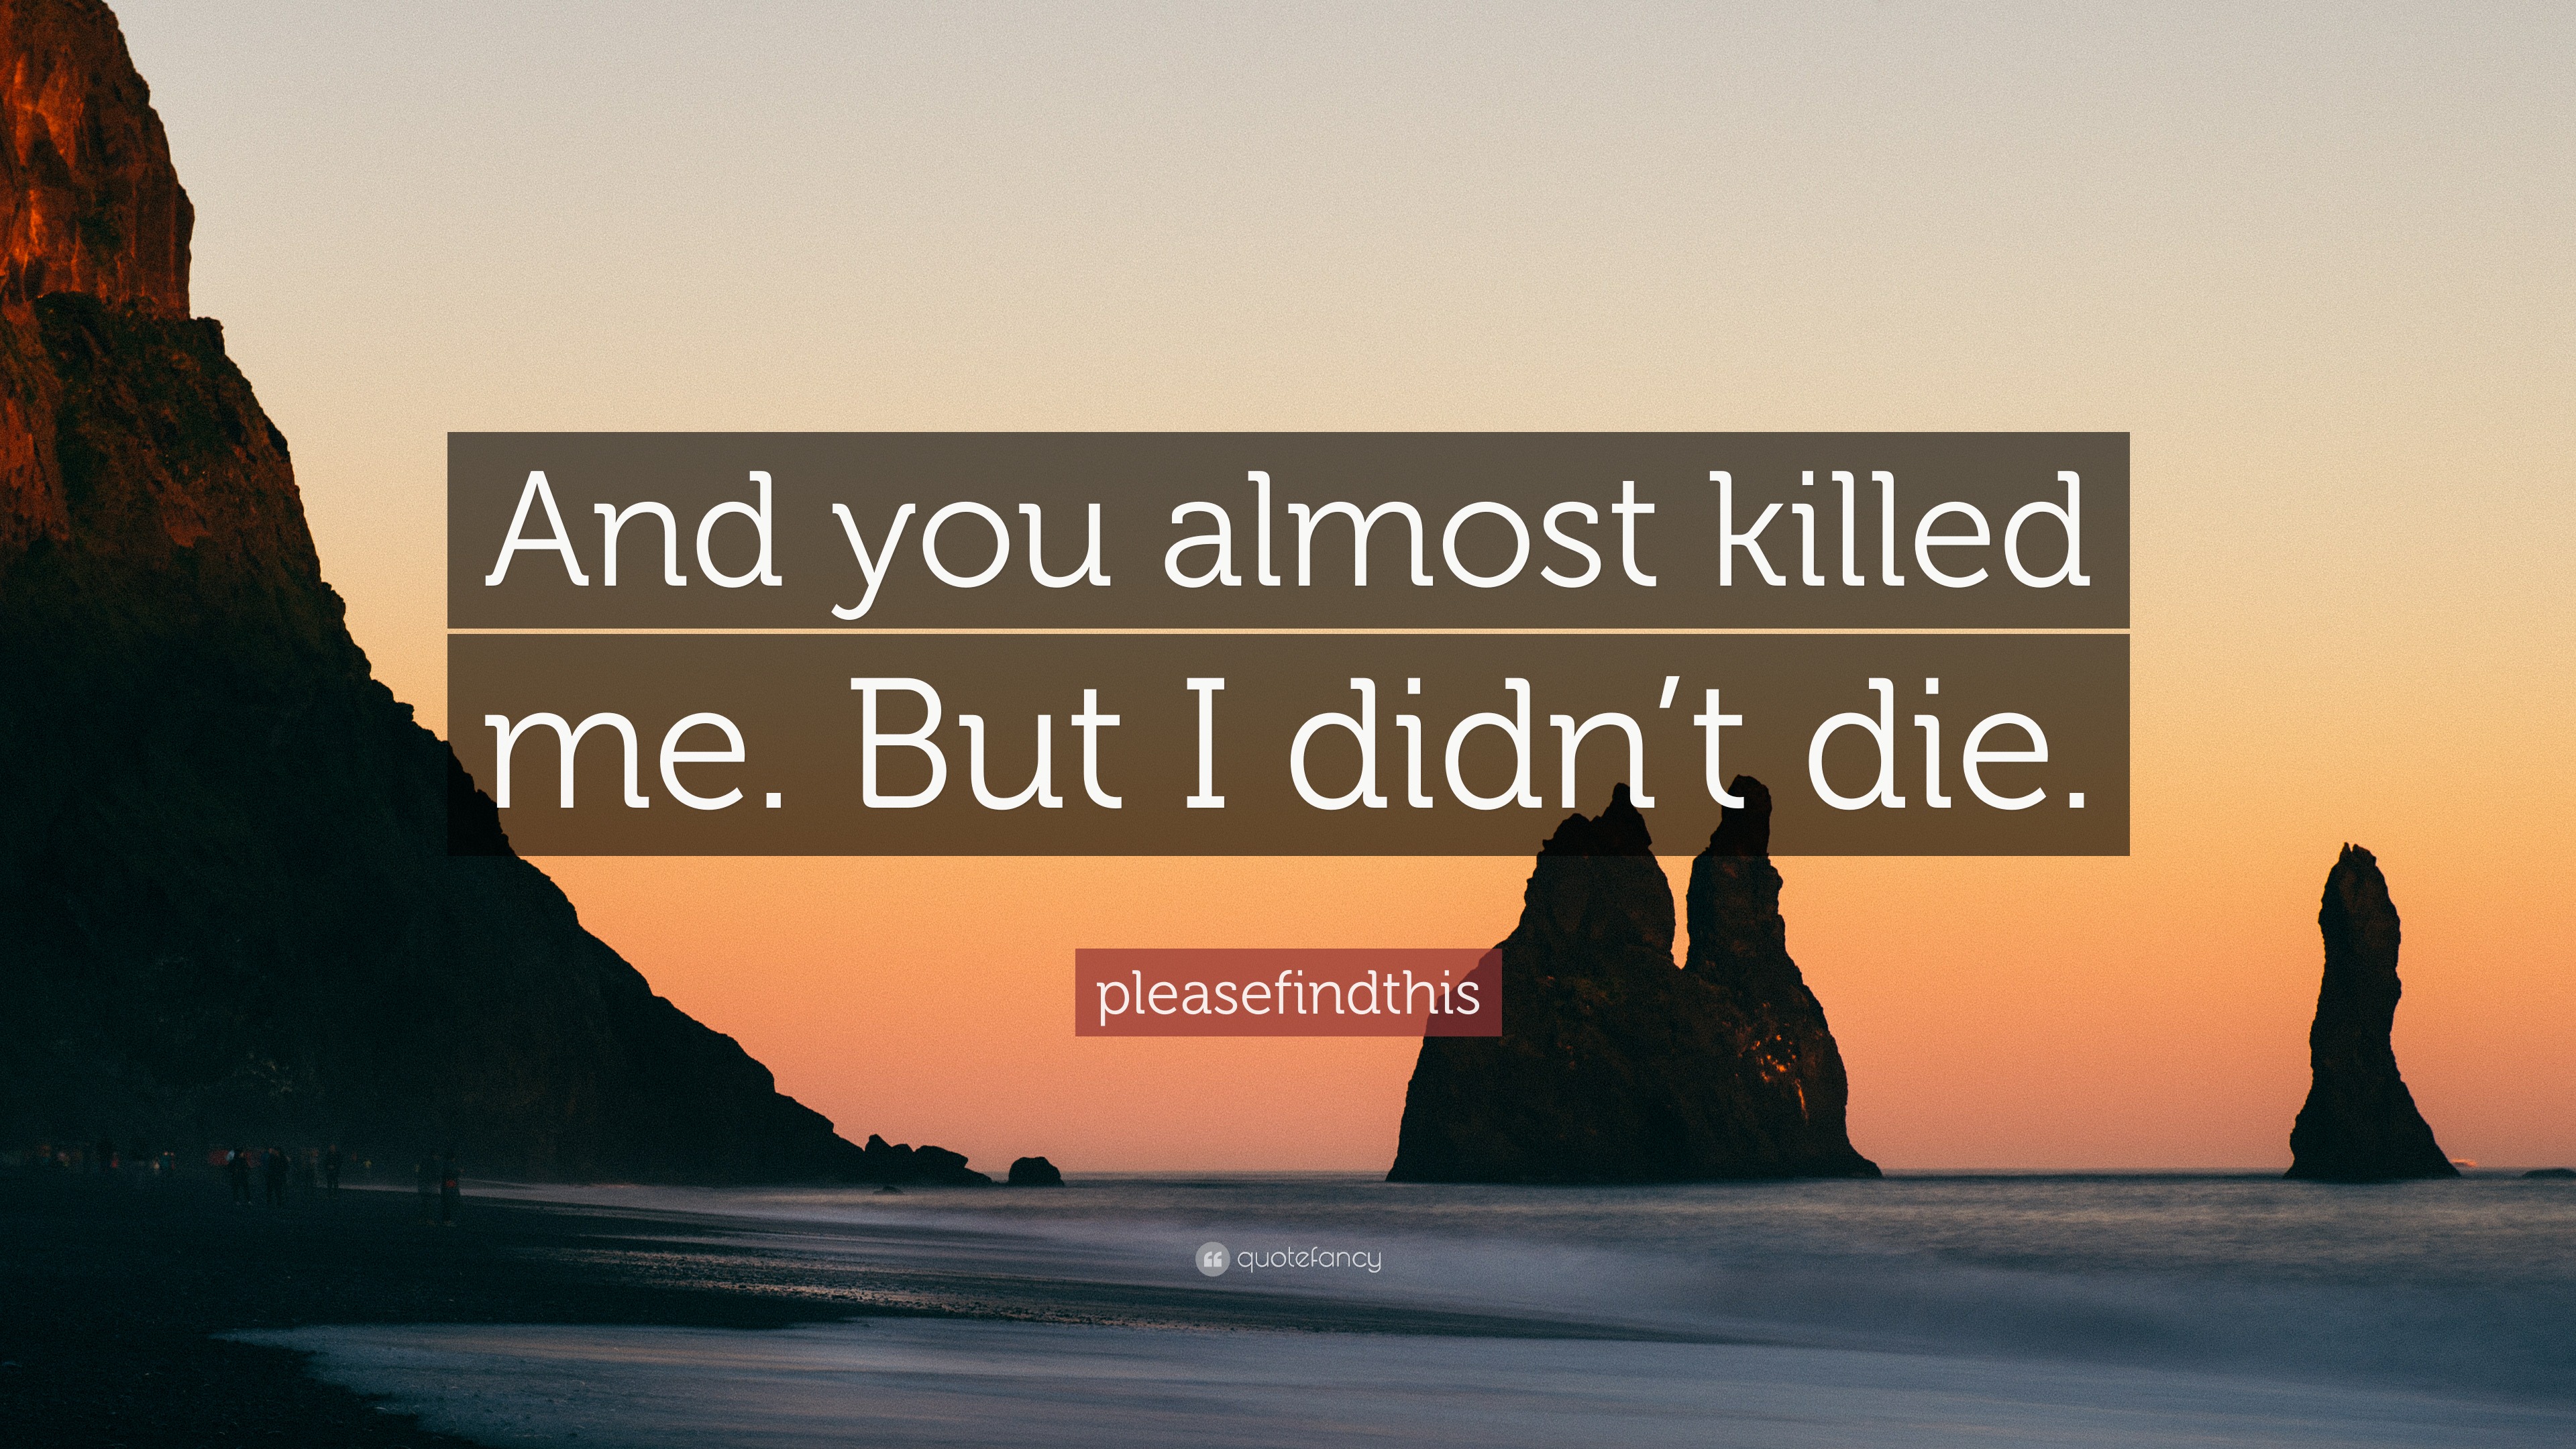 pleasefindthis Quote: “And you almost killed me. But I didn't die.”